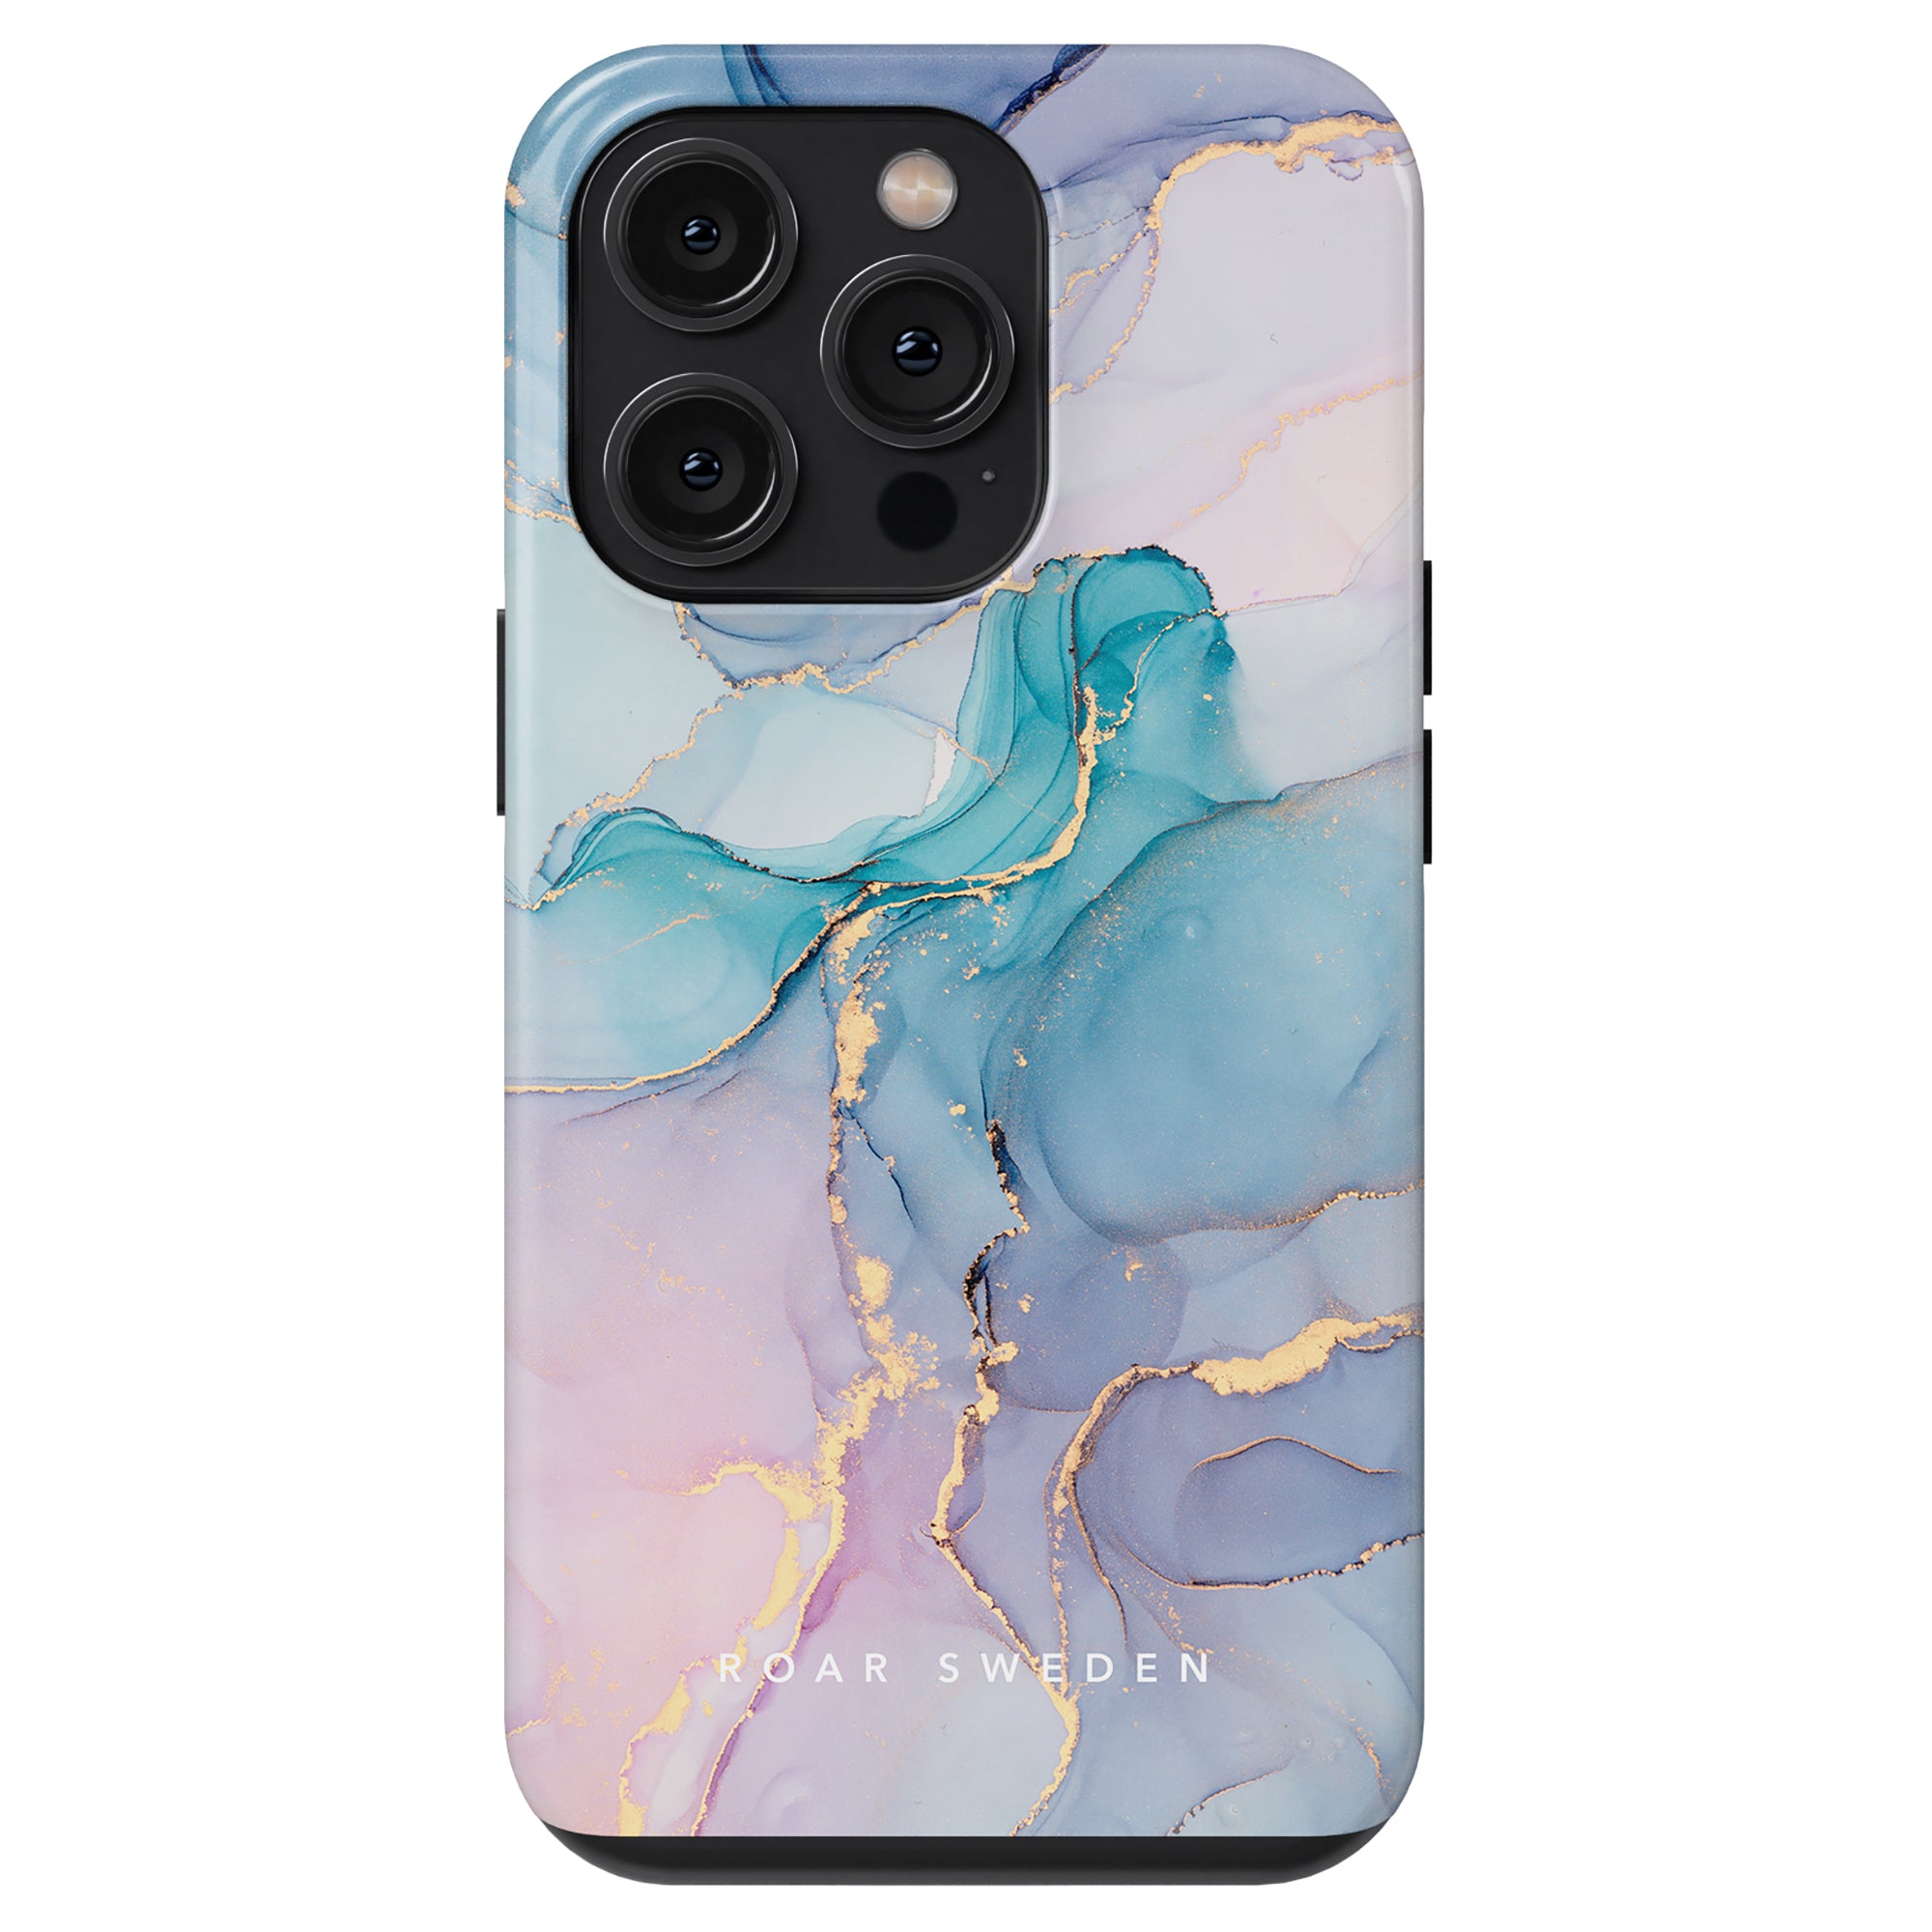 A skyddande blue and gold Swirl - Tough Case for the iPhone 11.